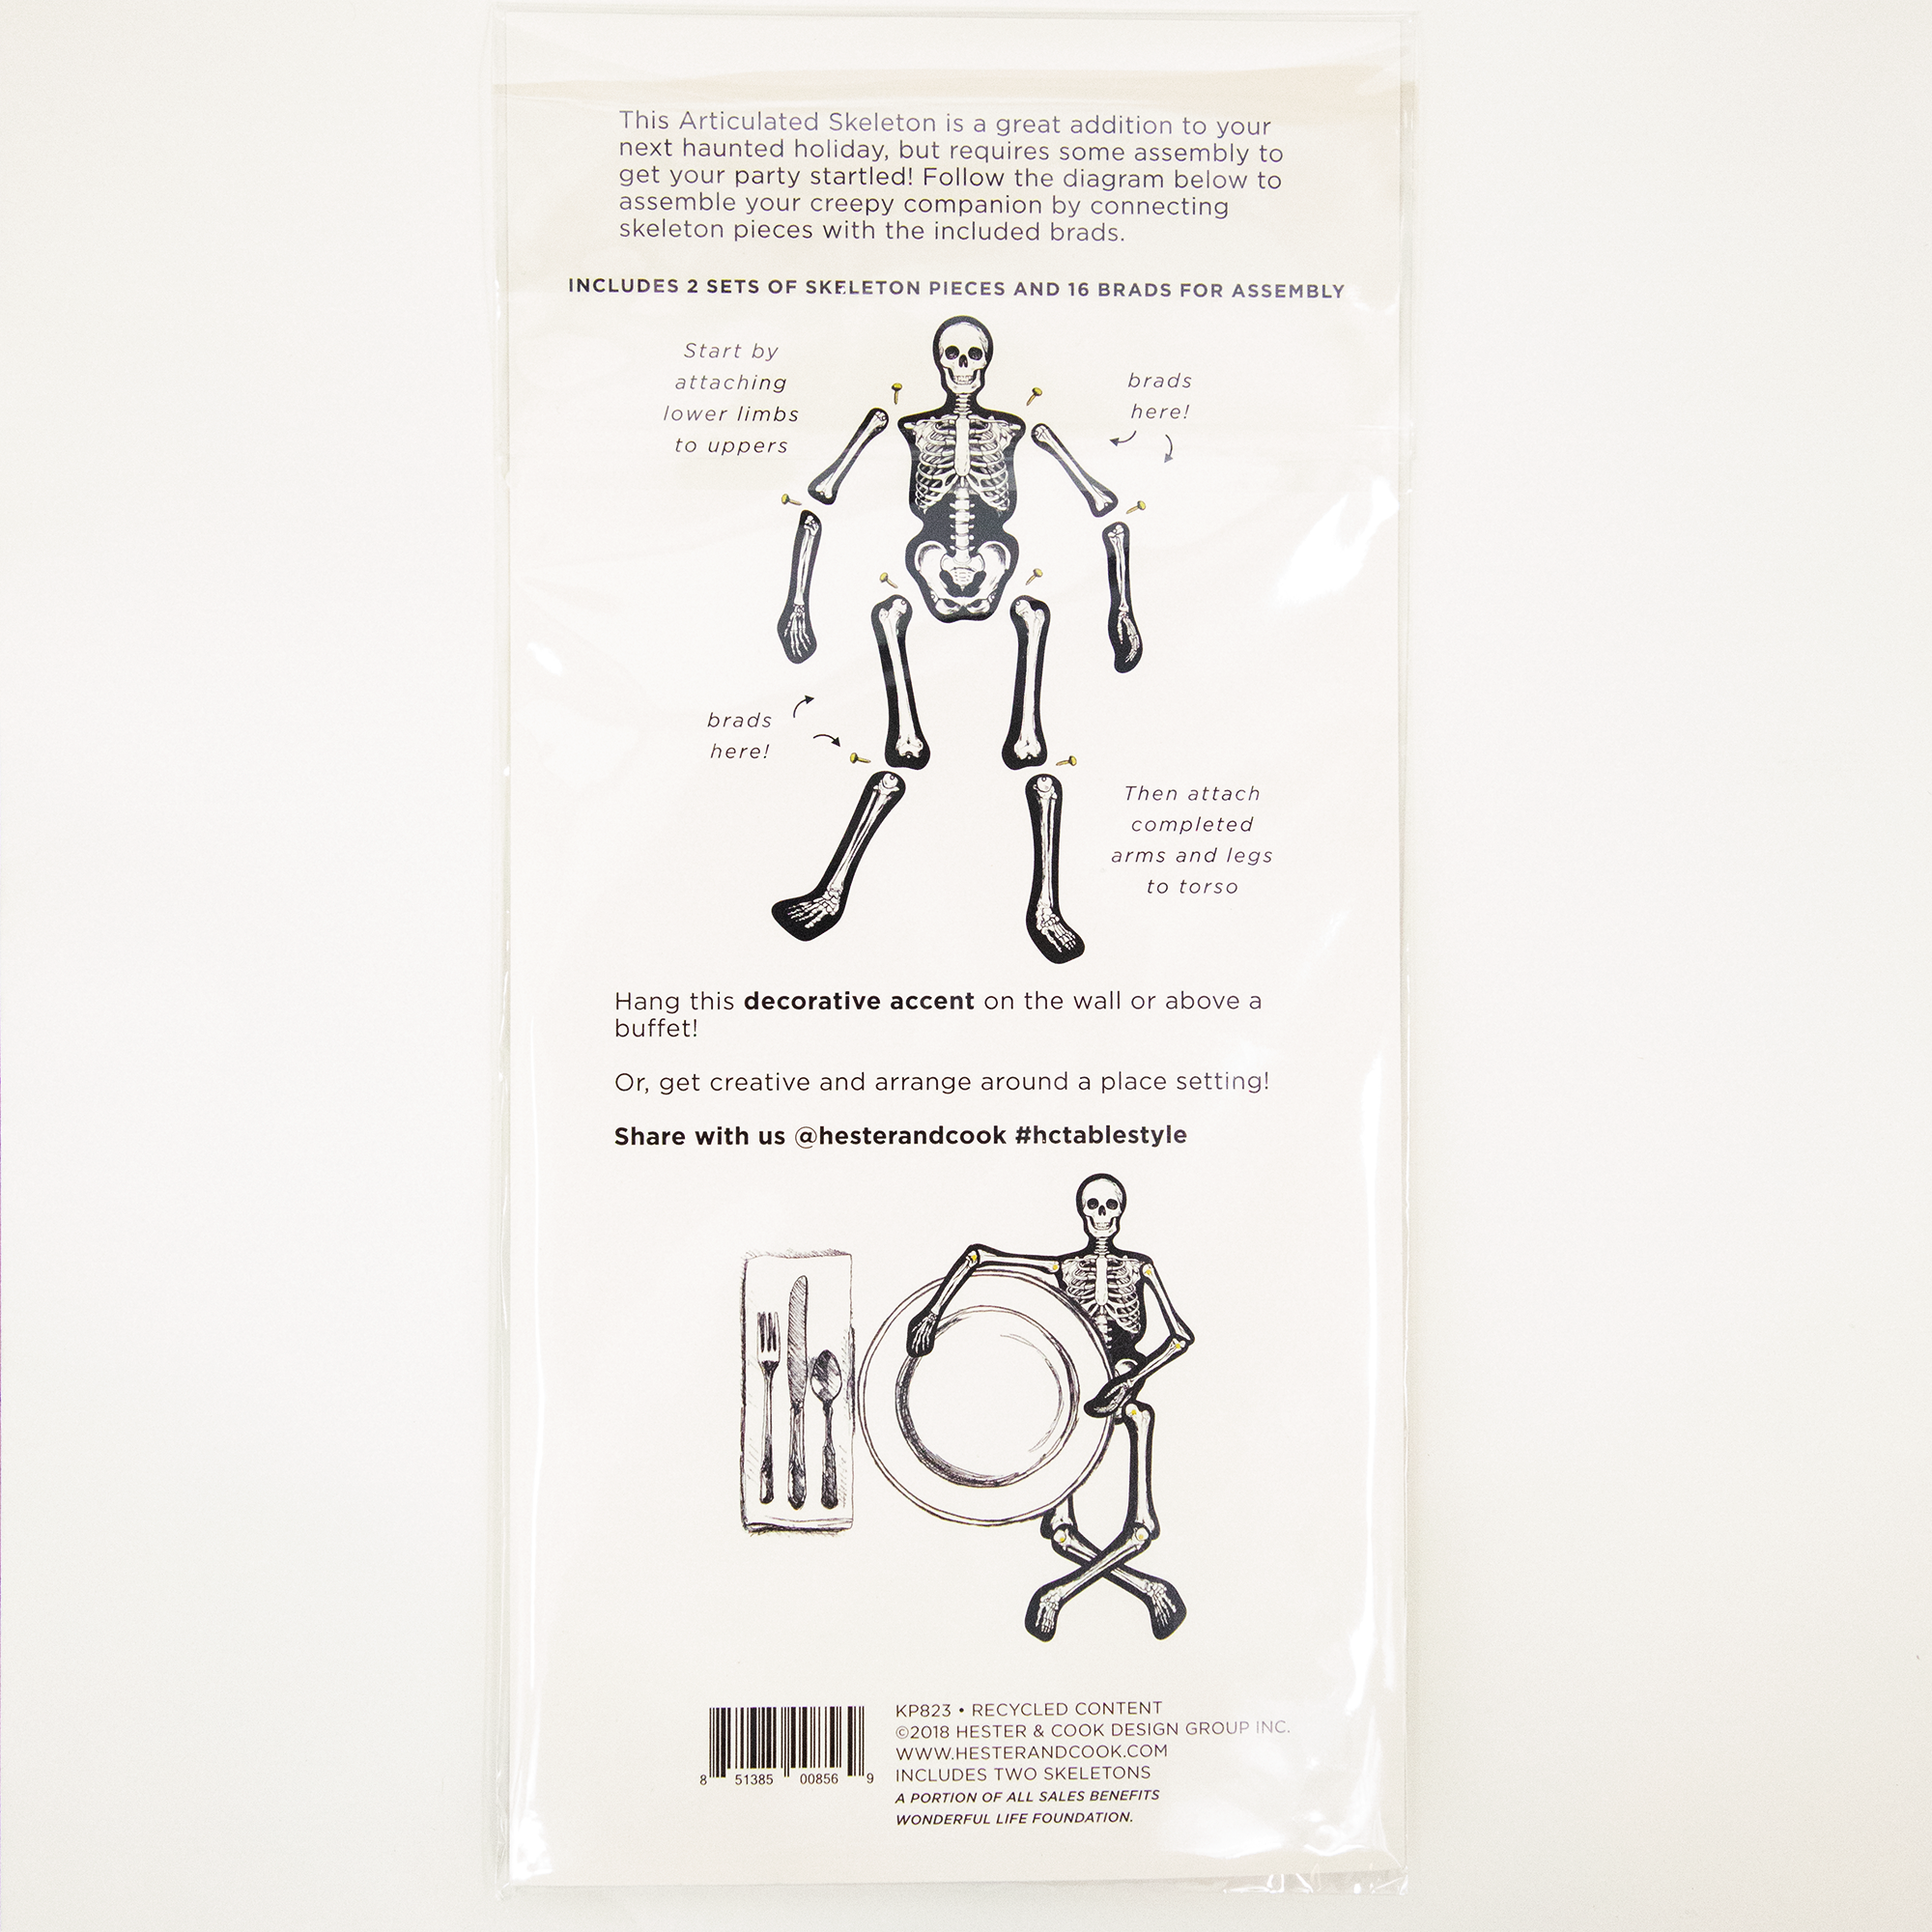 The back side of the Articulated Skeleton Decorative Accent, which includes instructions for how to assemble the skeleton and suggestions for use.